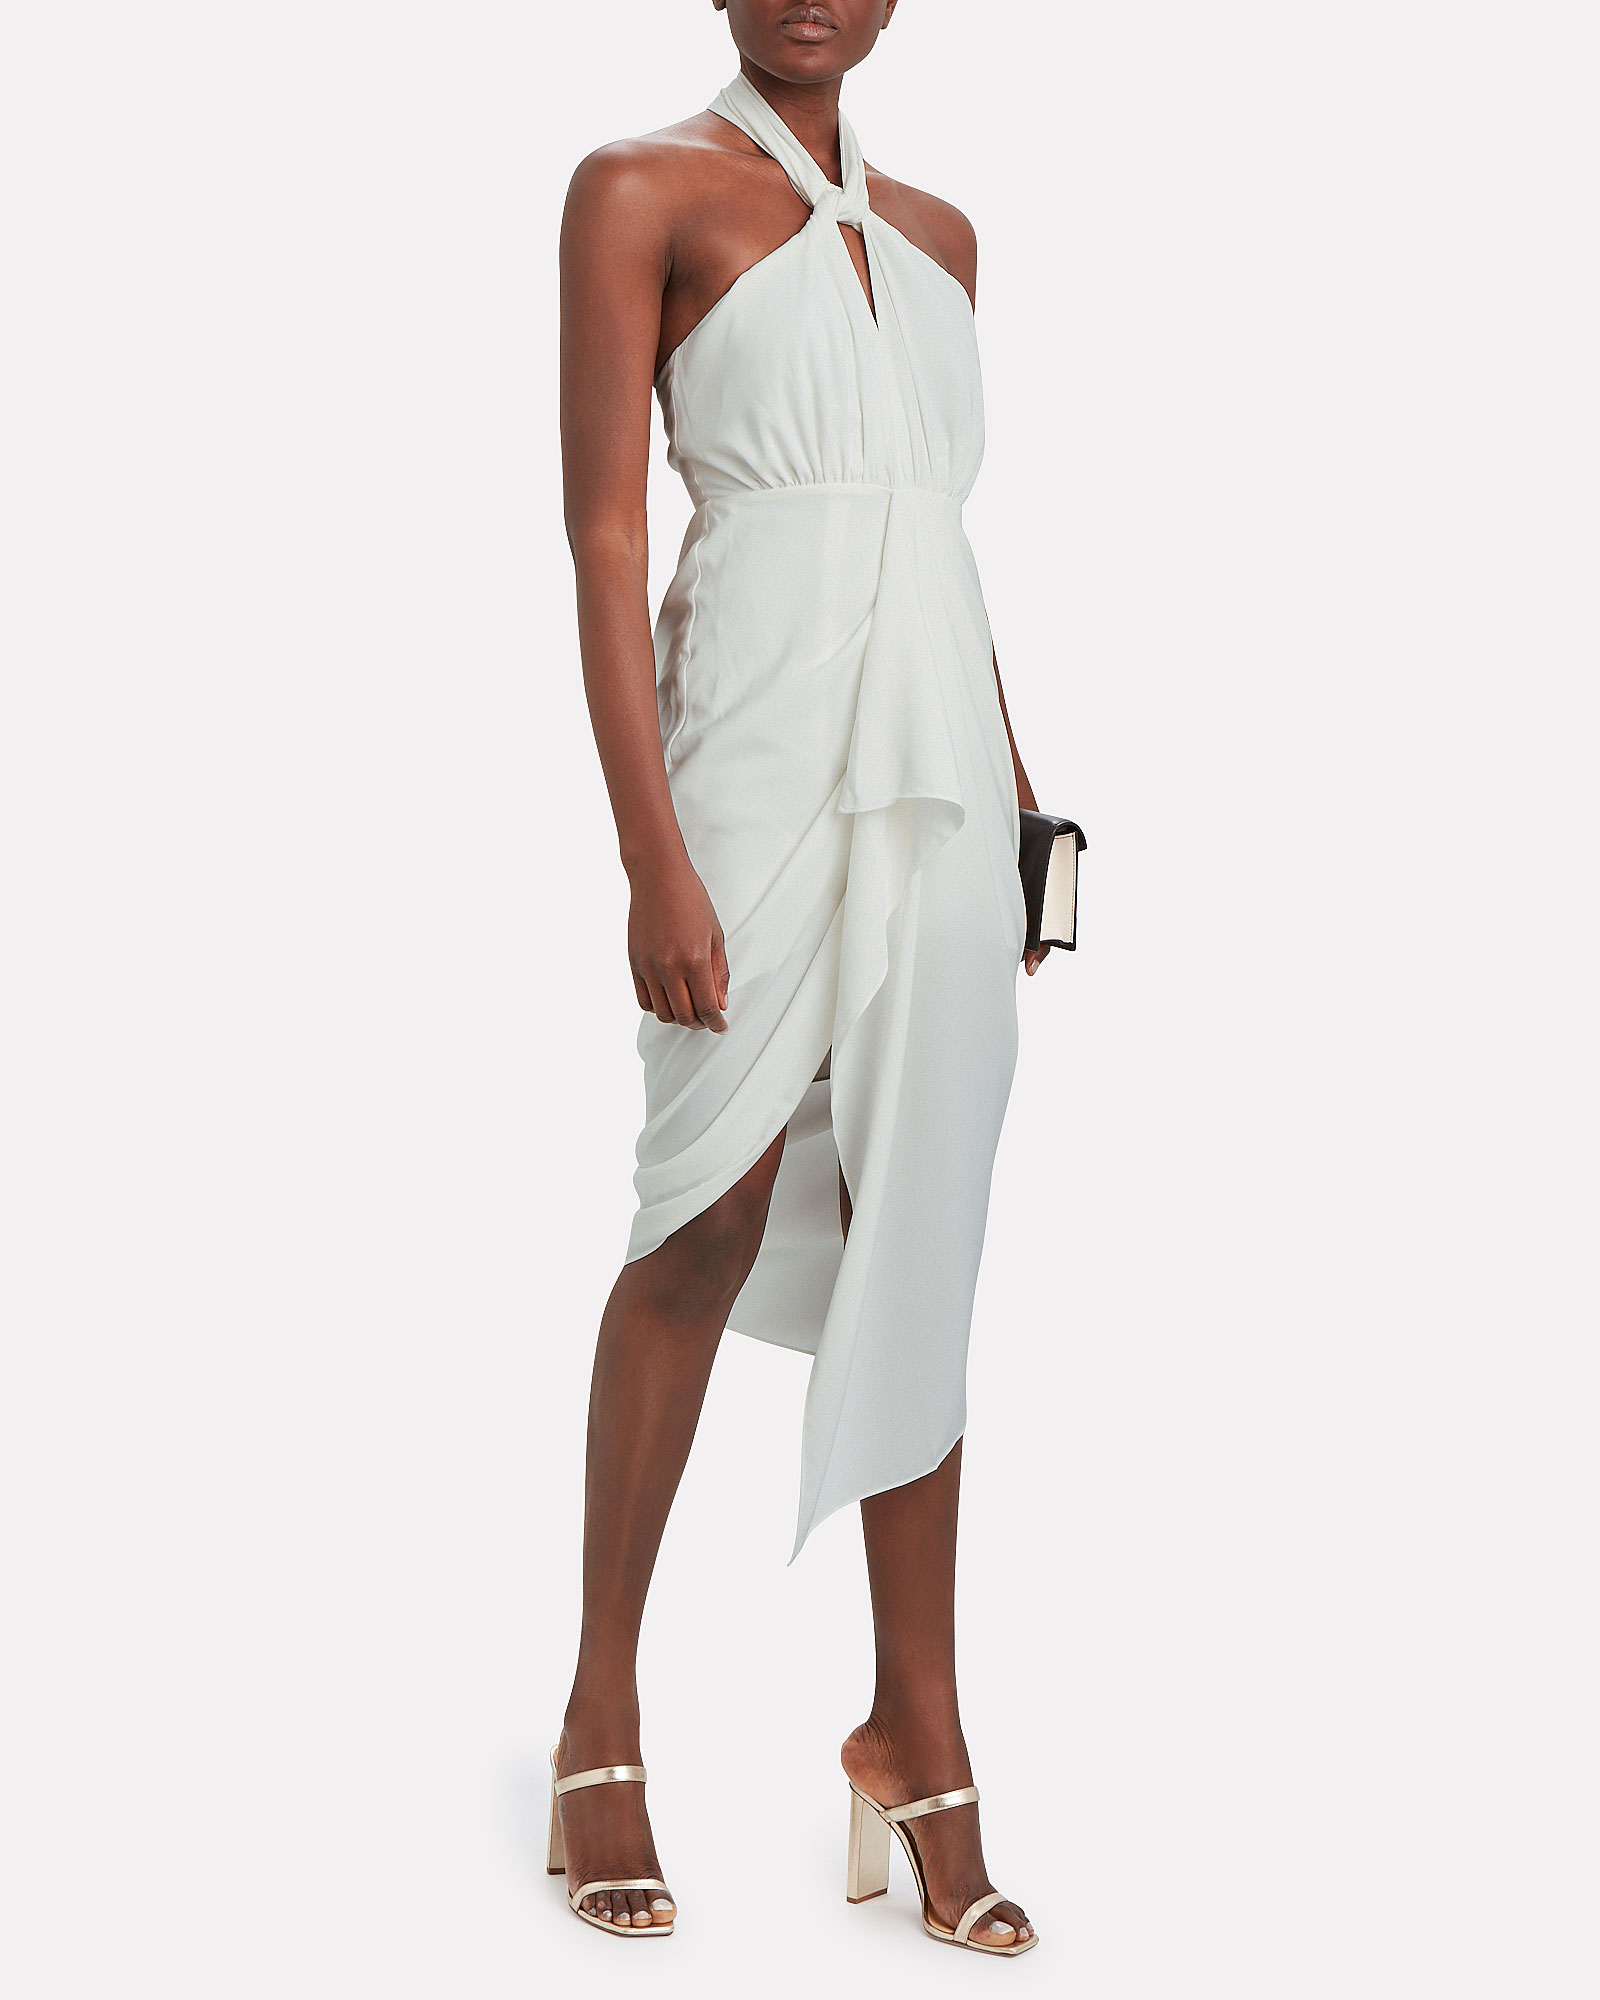 Significant Other | Calypso Crepe Halter Dress | INTERMIX®